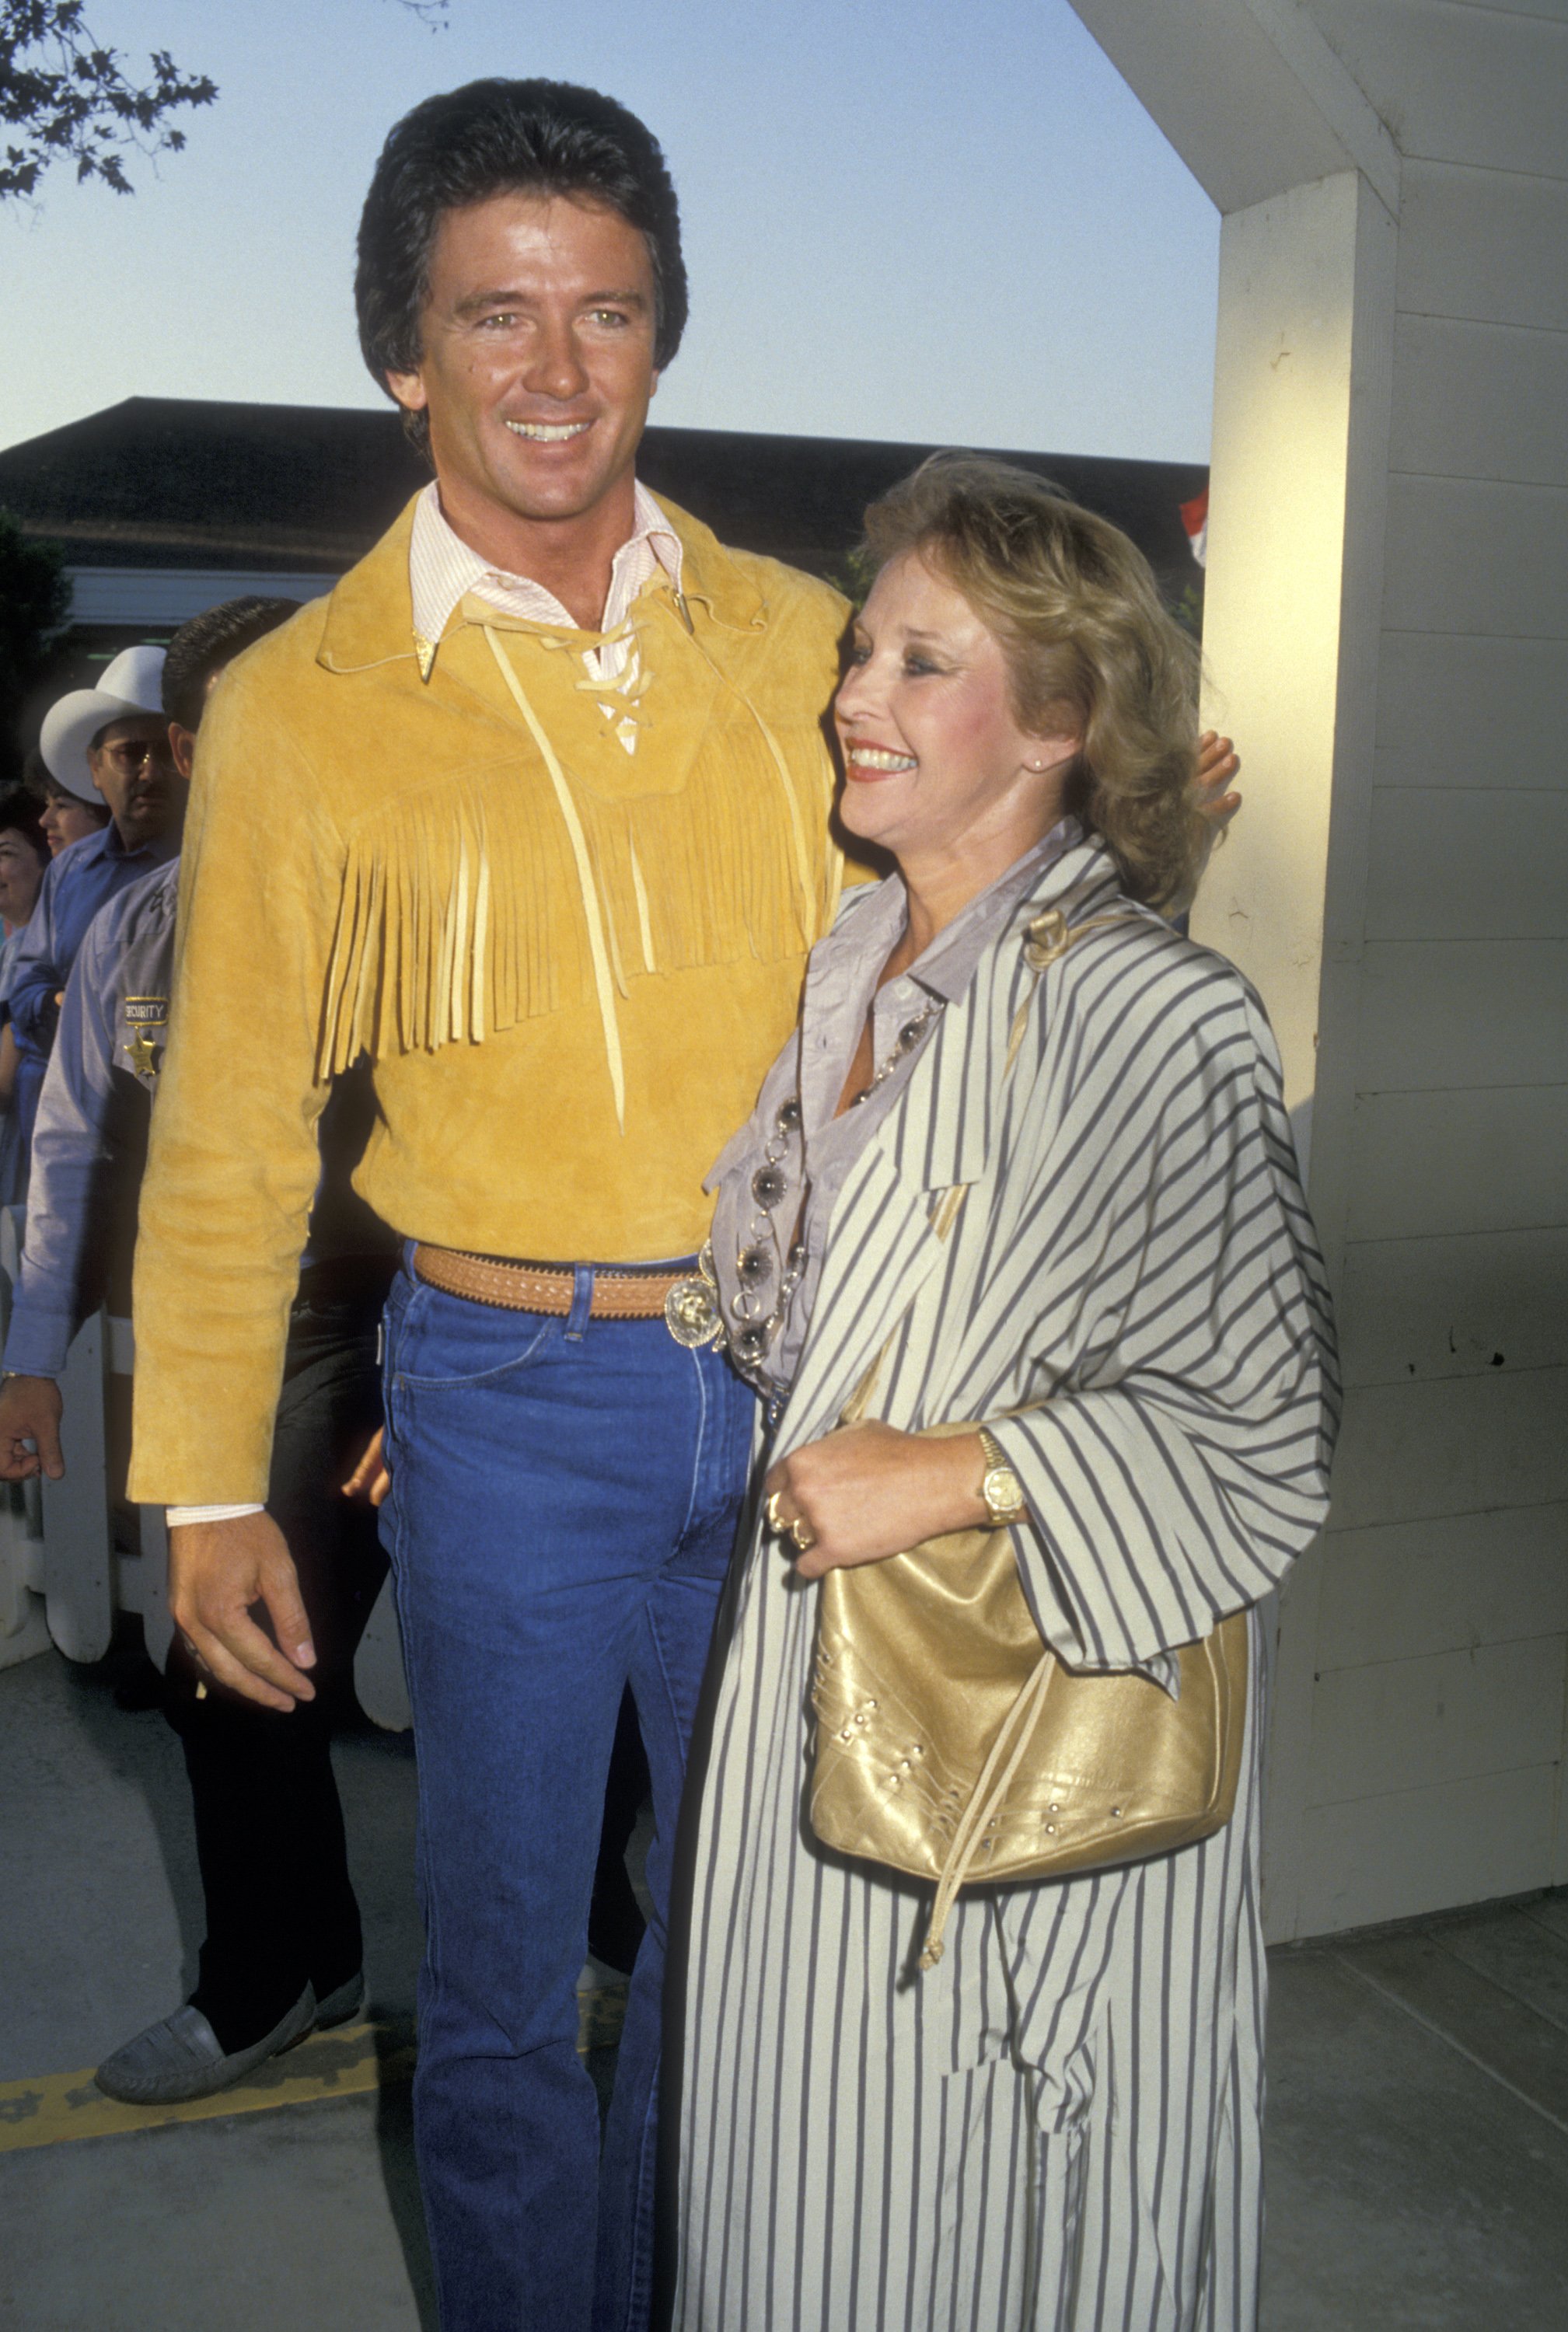 Patrick Duffy and Wife Carlyn Rosser Attend Fifth Annual Golden Boot Awards on August 15, 1987 in Burbank, California |  Photo: Getty Images 